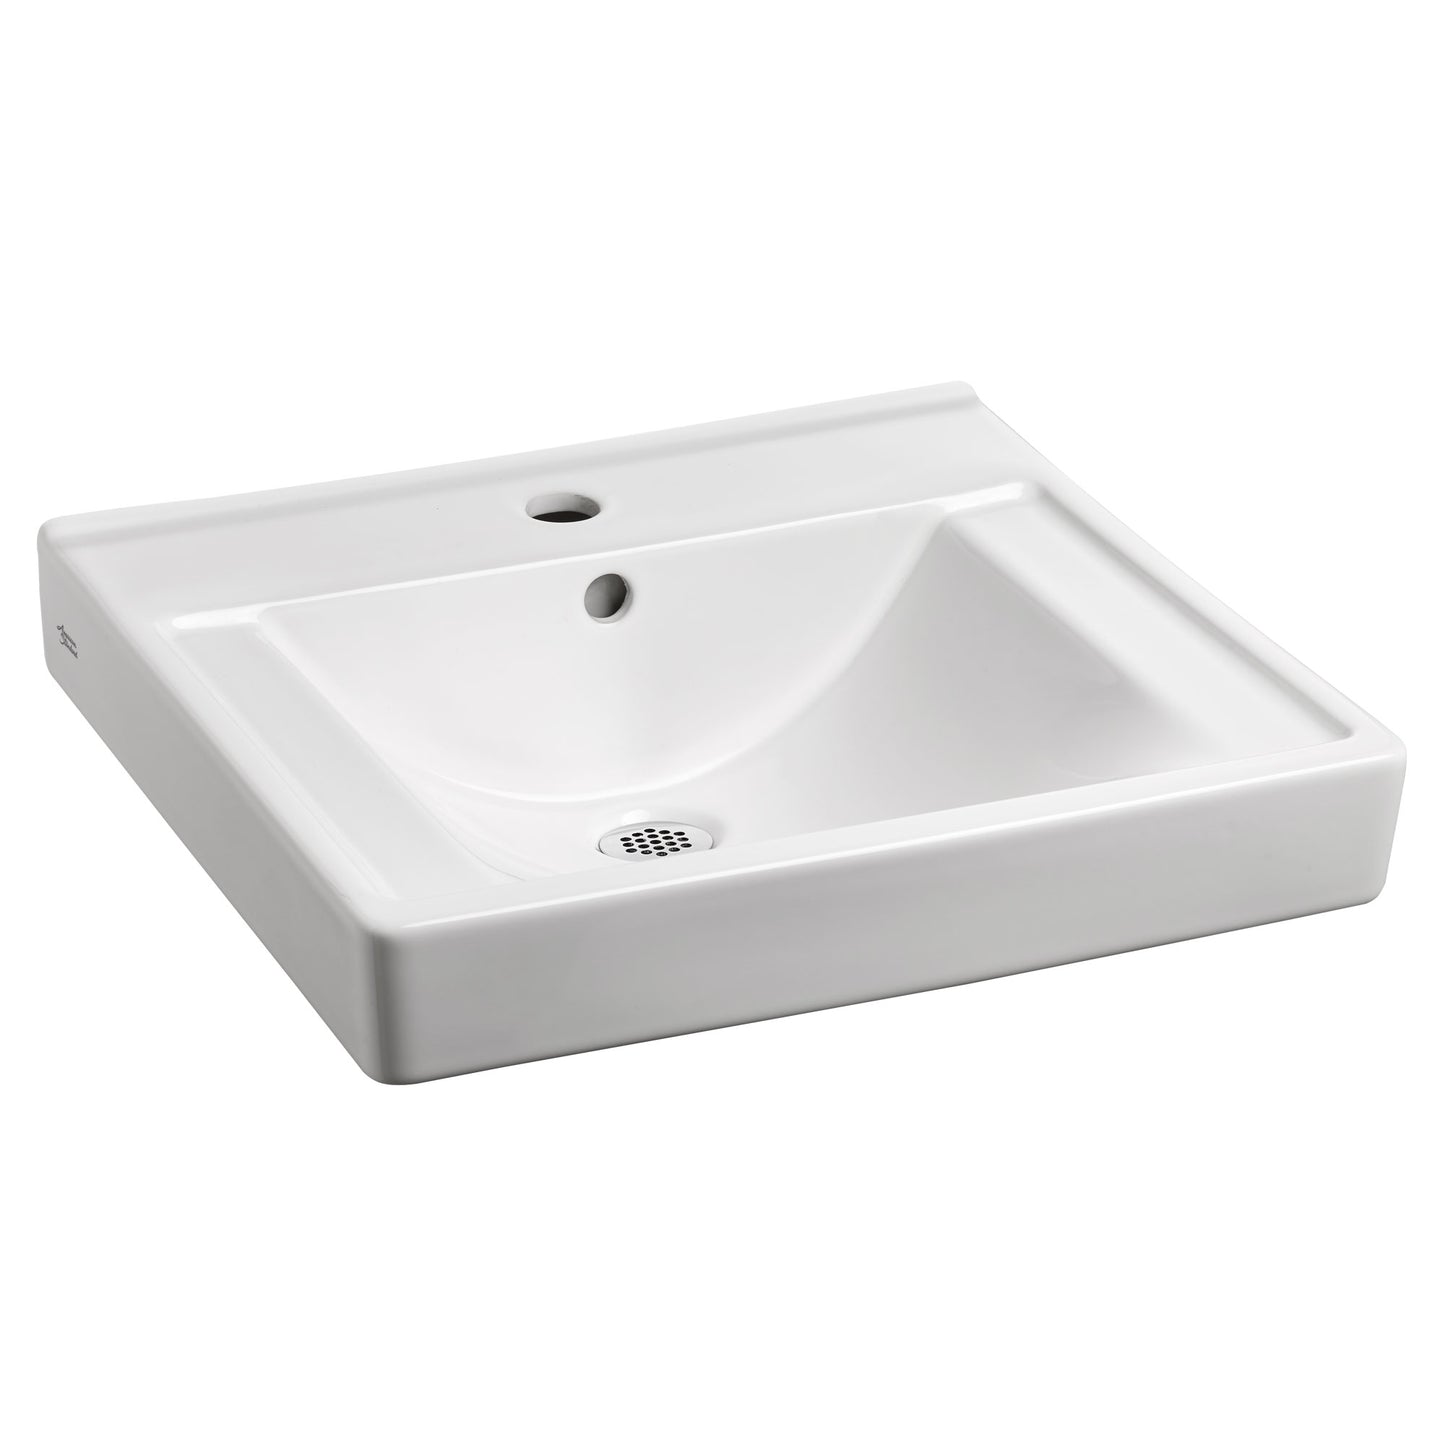 AMERICAN-STANDARD 9024001EC.020, Decorum Wall-Hung EverClean Sink With Center Hole Only in White